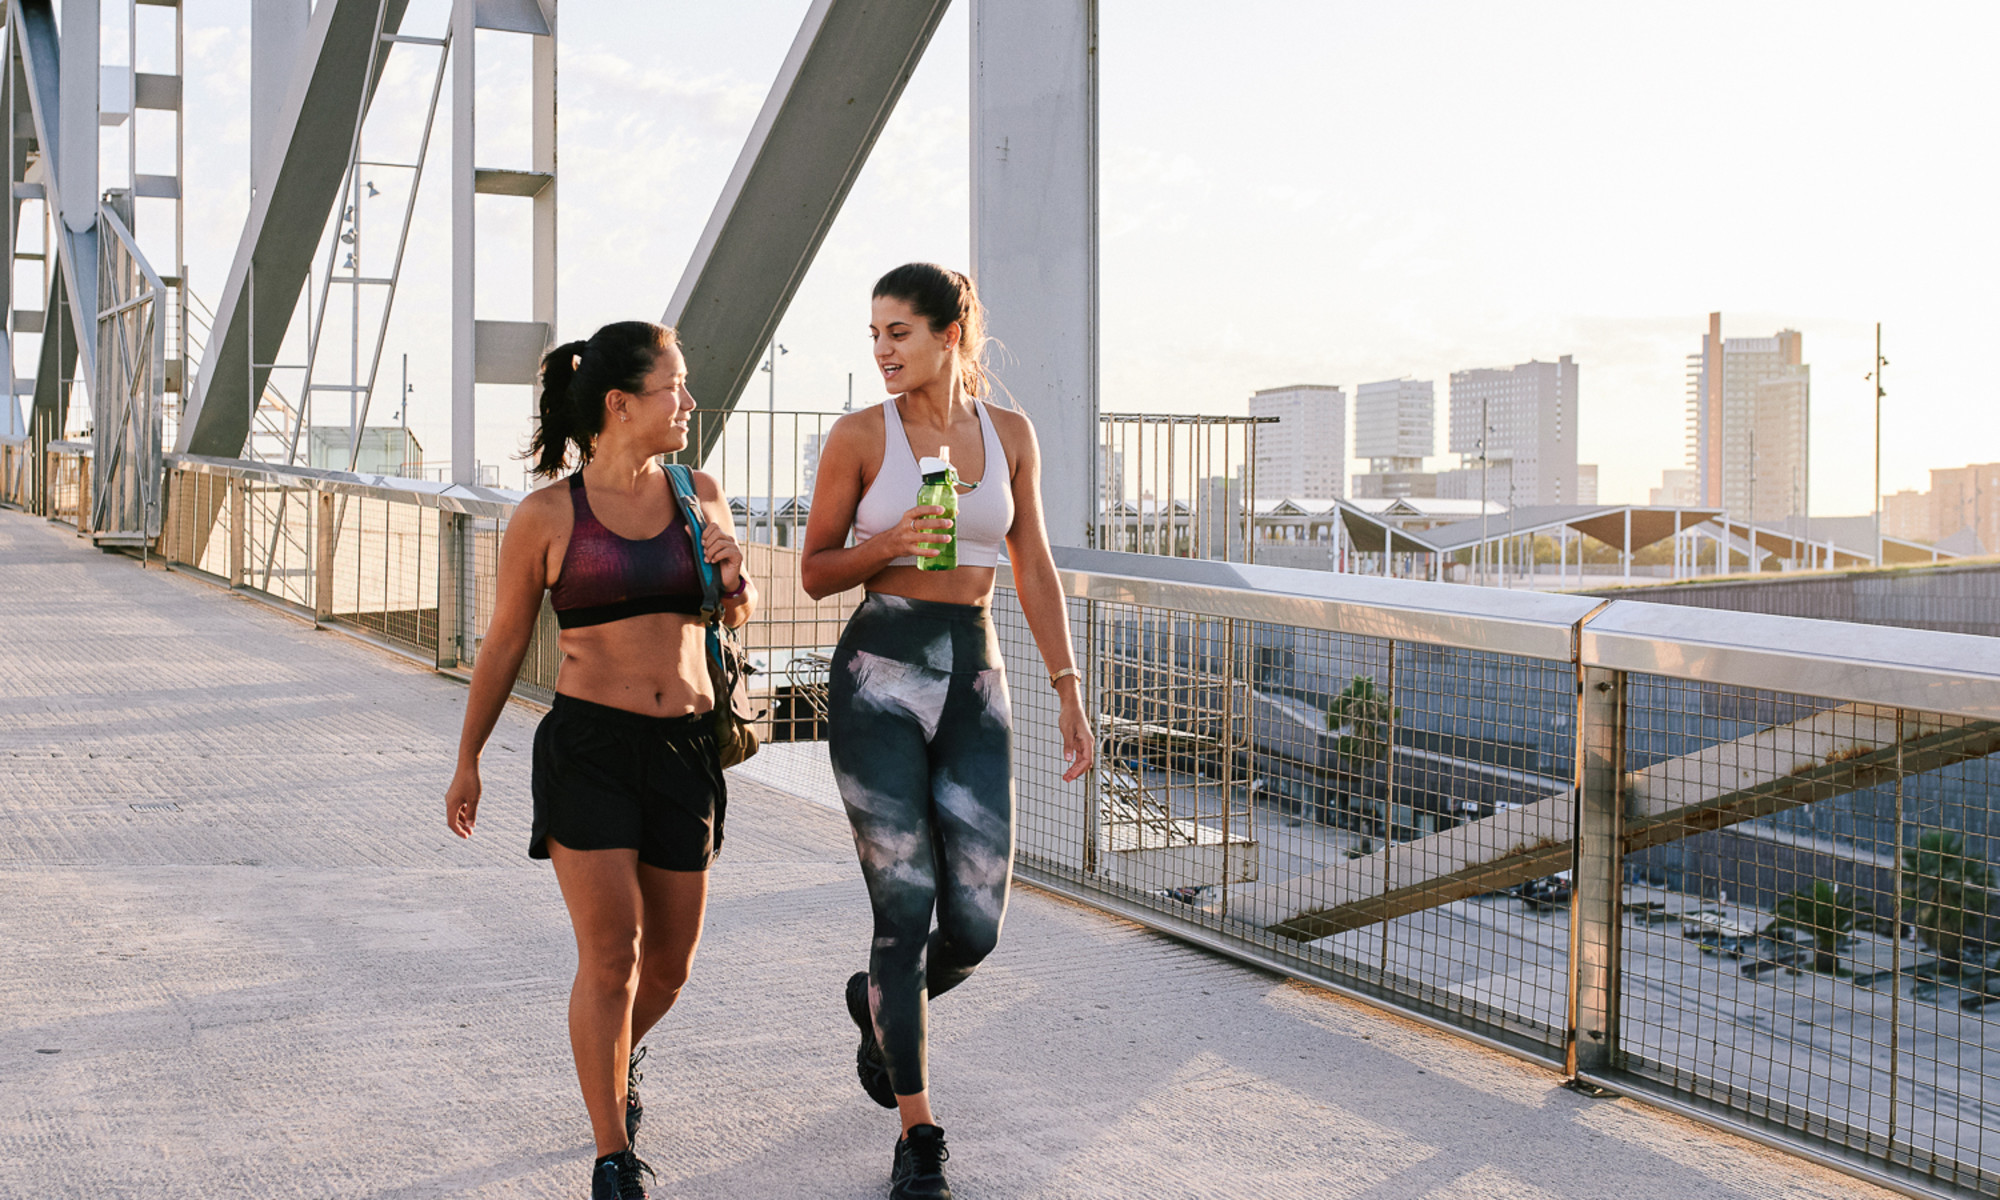 Walking Vs. Running: Which Is Better For Mental Health & Weight Management?